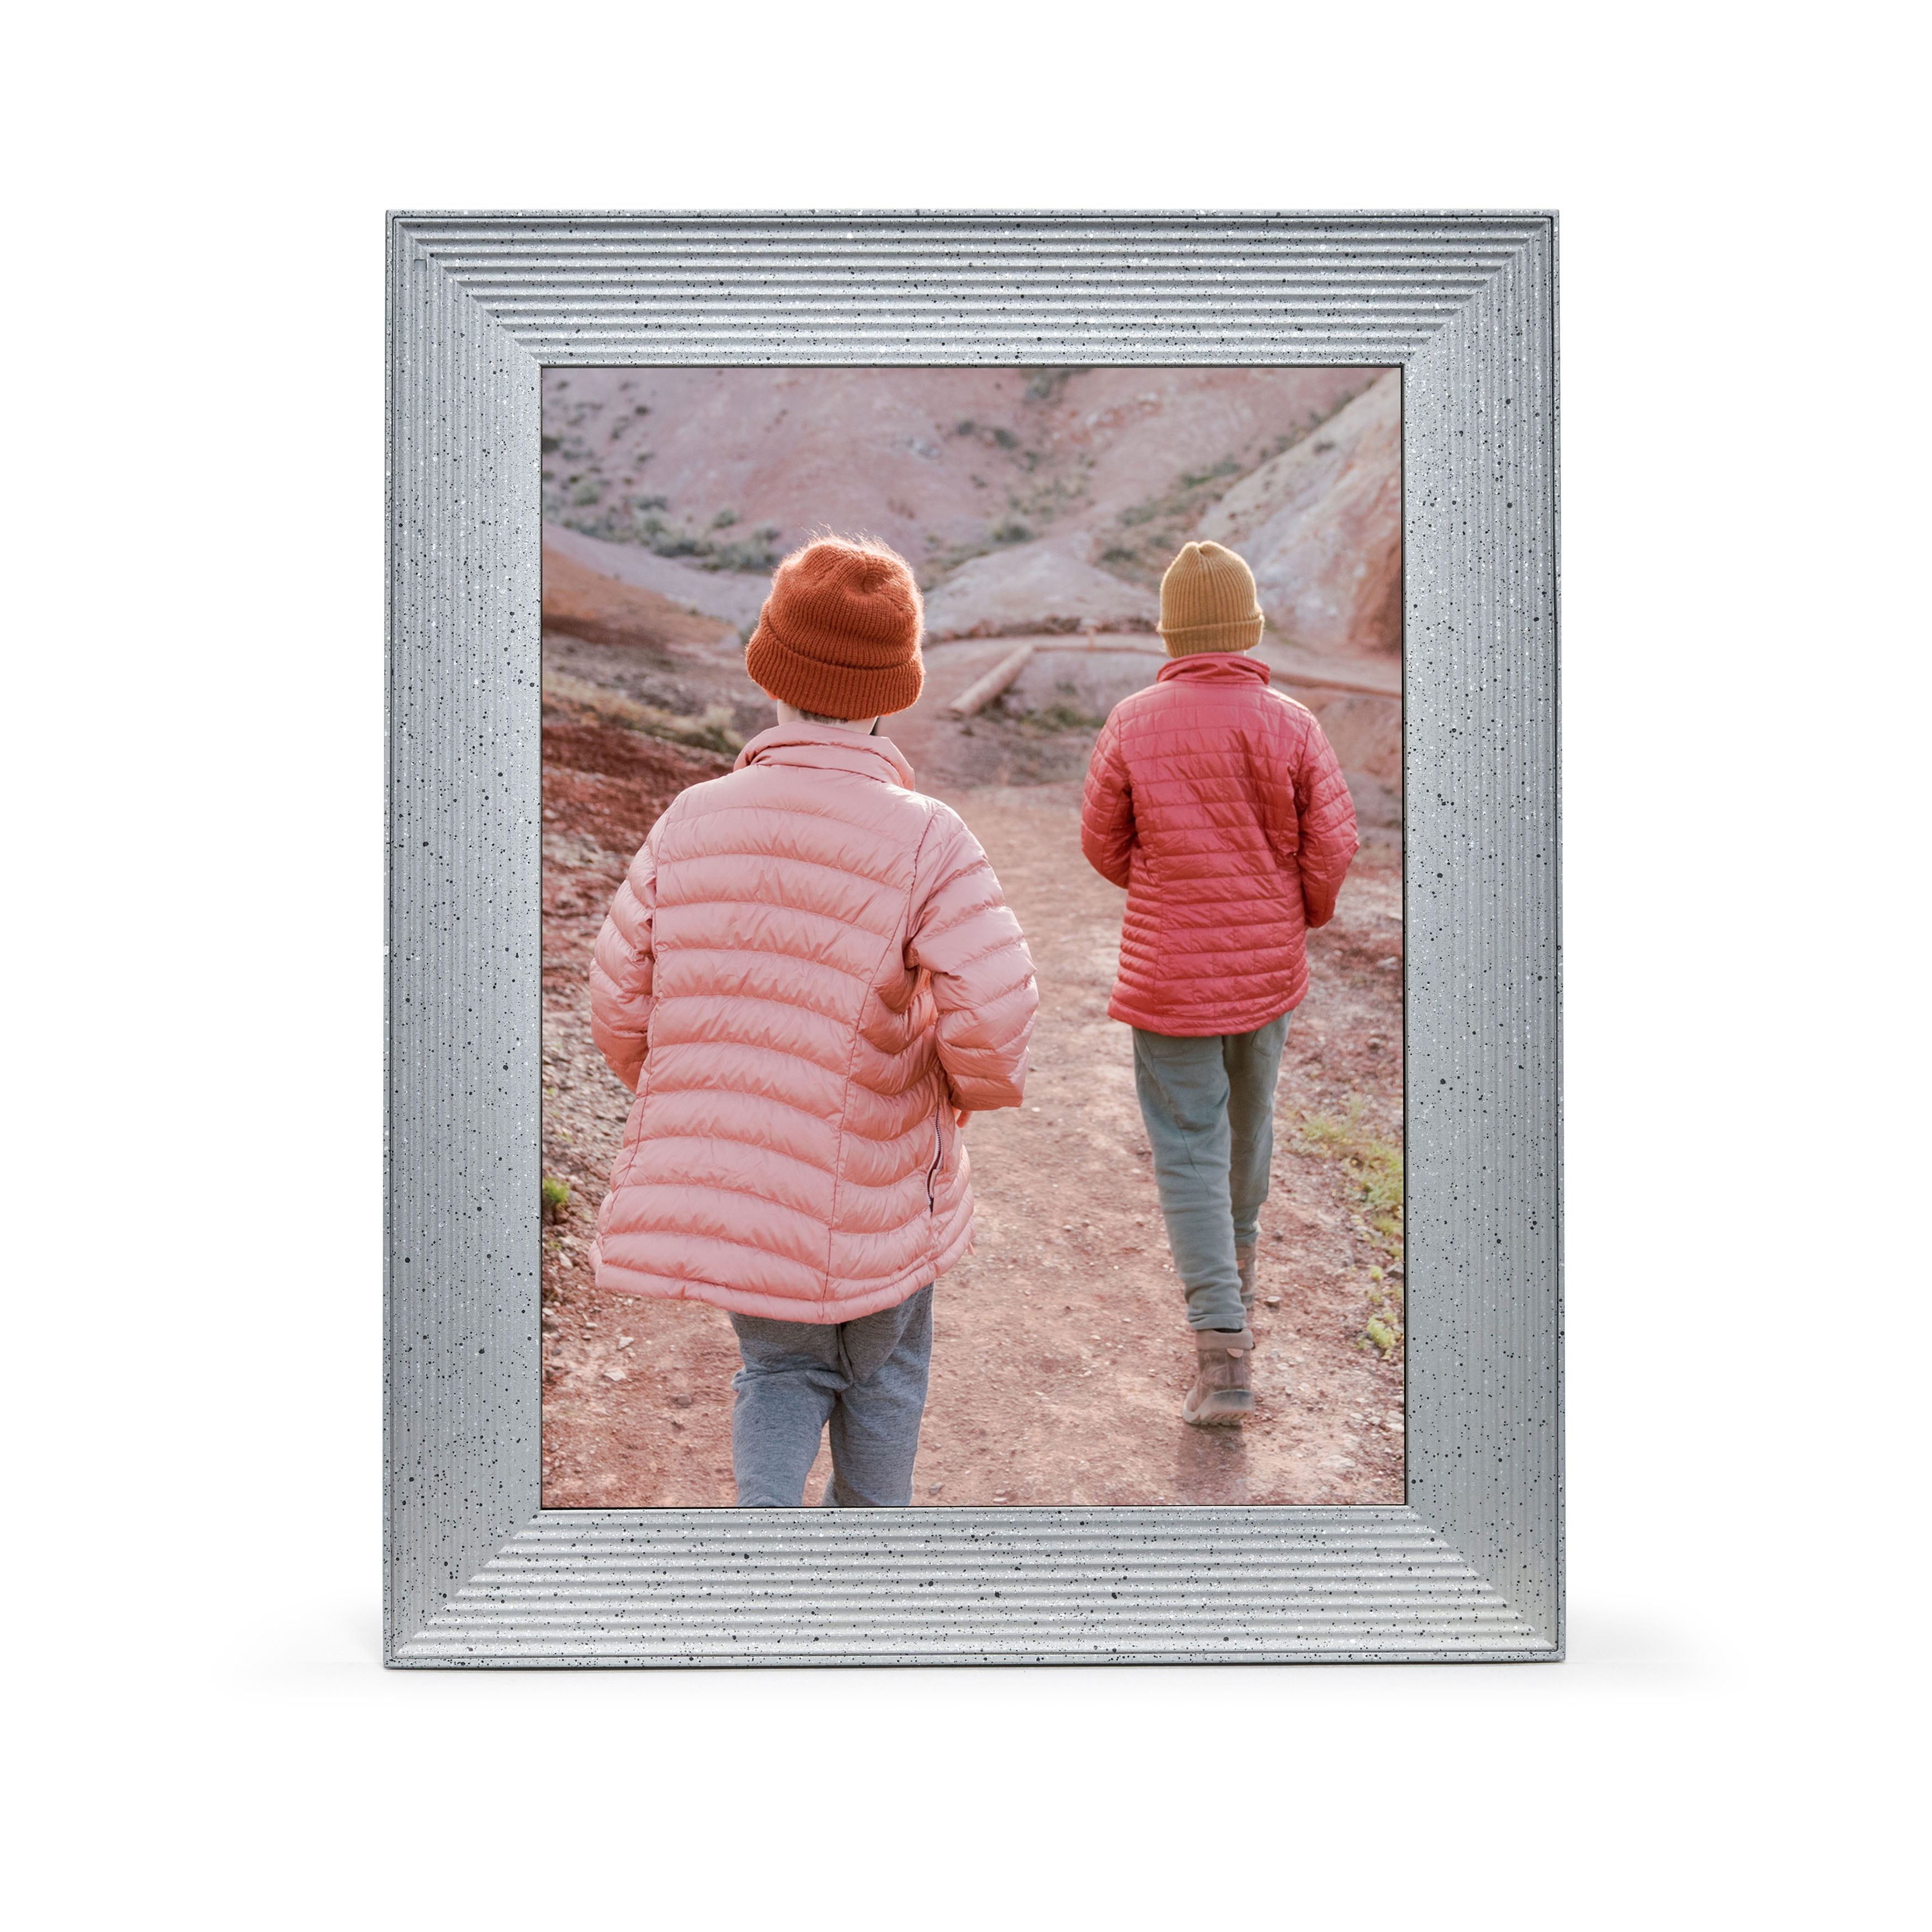 Sandstone Picture 9.7 Frames with inch Storage Digital 2K Frame Unlimited Mason Free Aura Wi-Fi – by Luxe